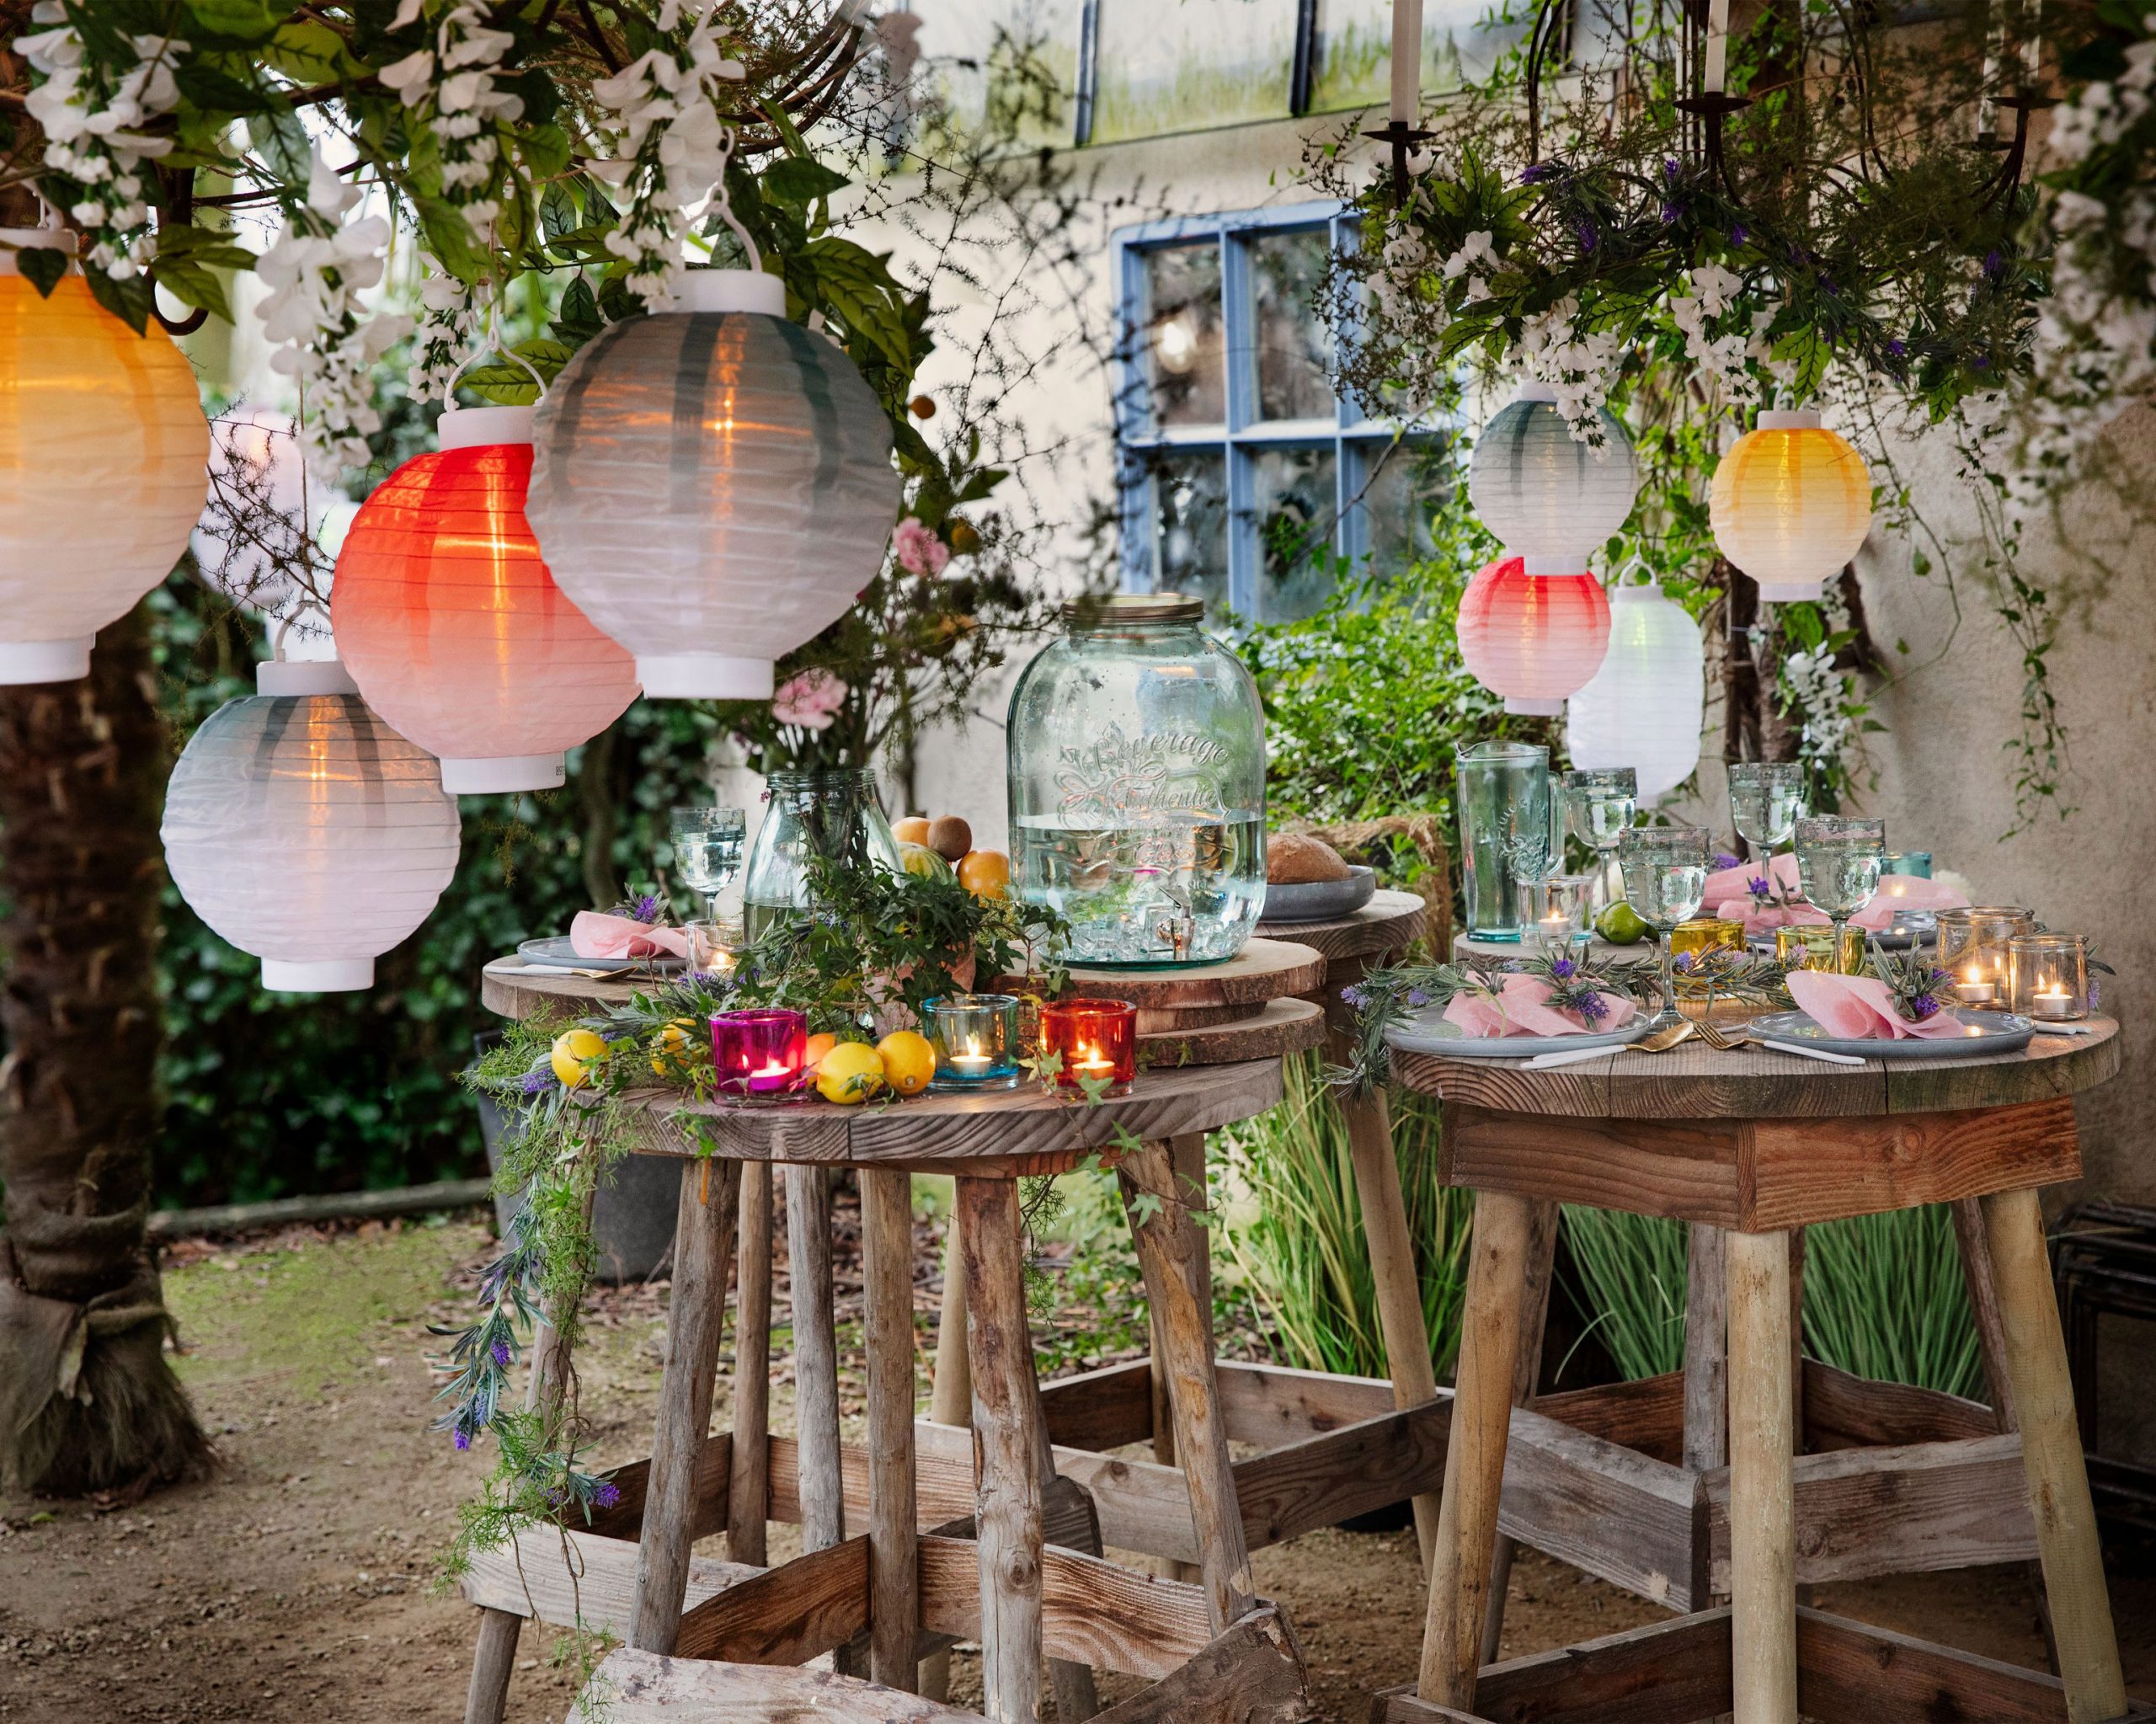 Top Decorations For Your Garden